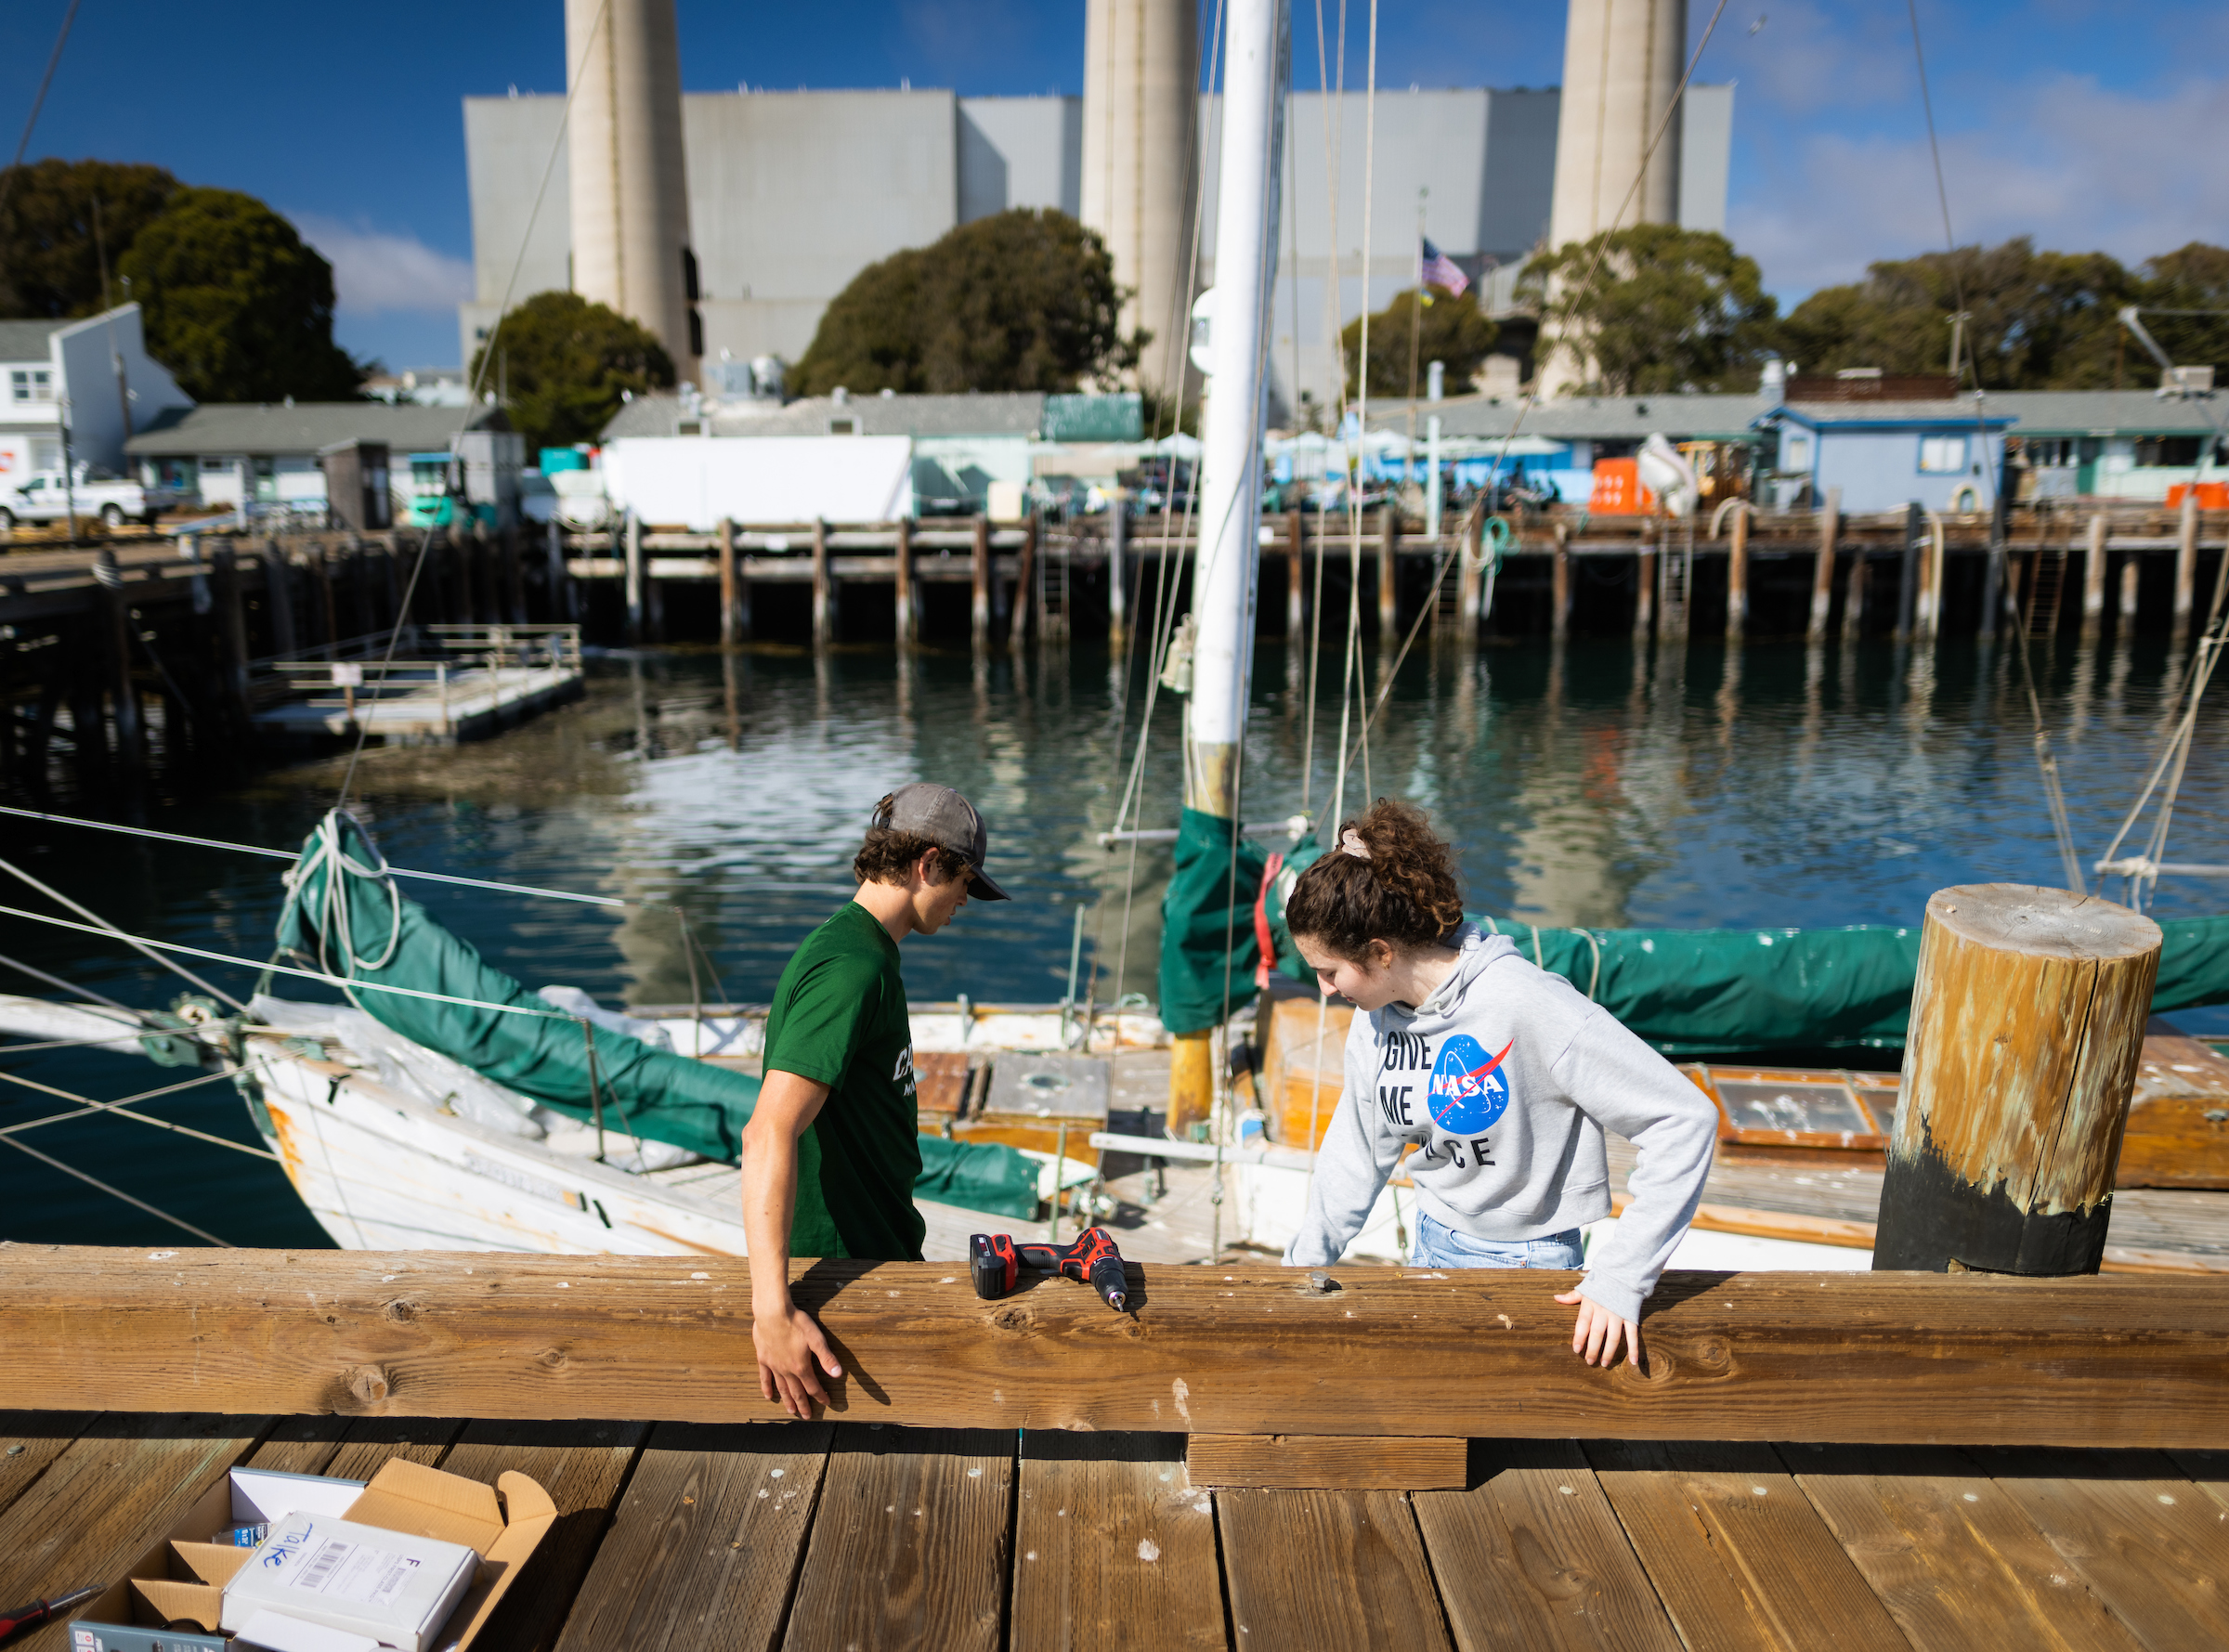 Two students hang off of a wooden pier as they check a scientific instrument.